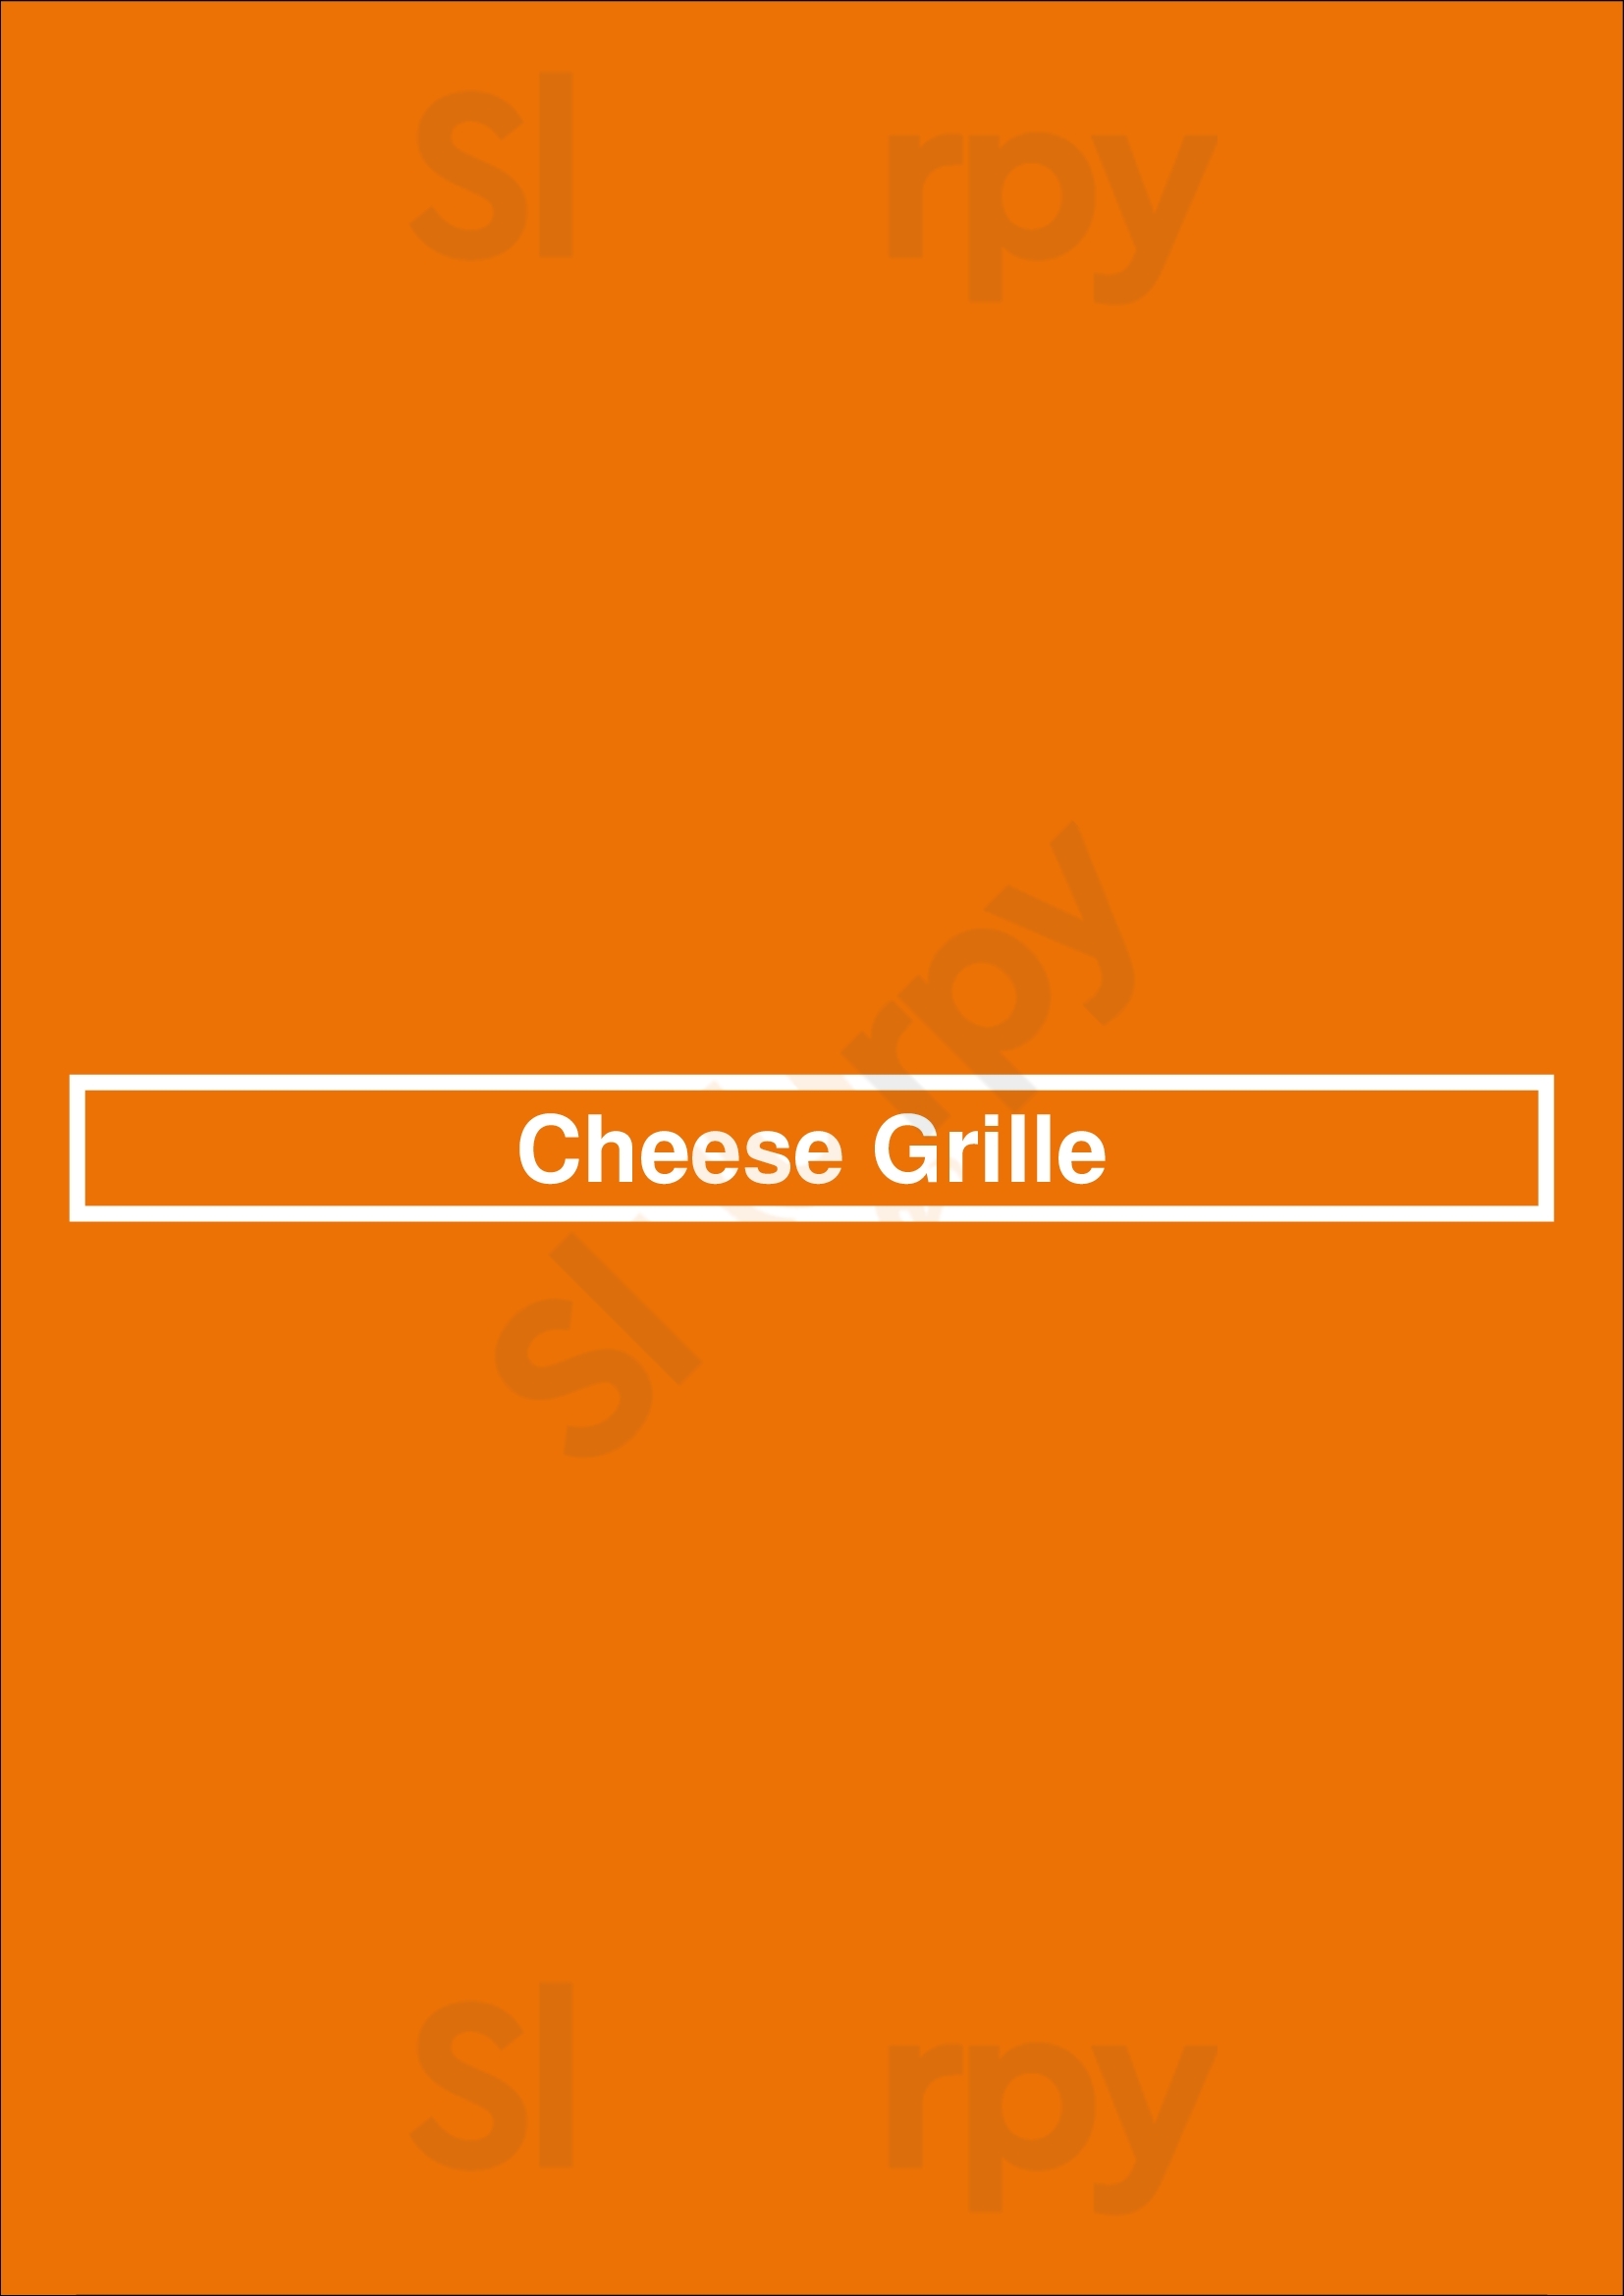 Cheese Grille New York City Menu - 1